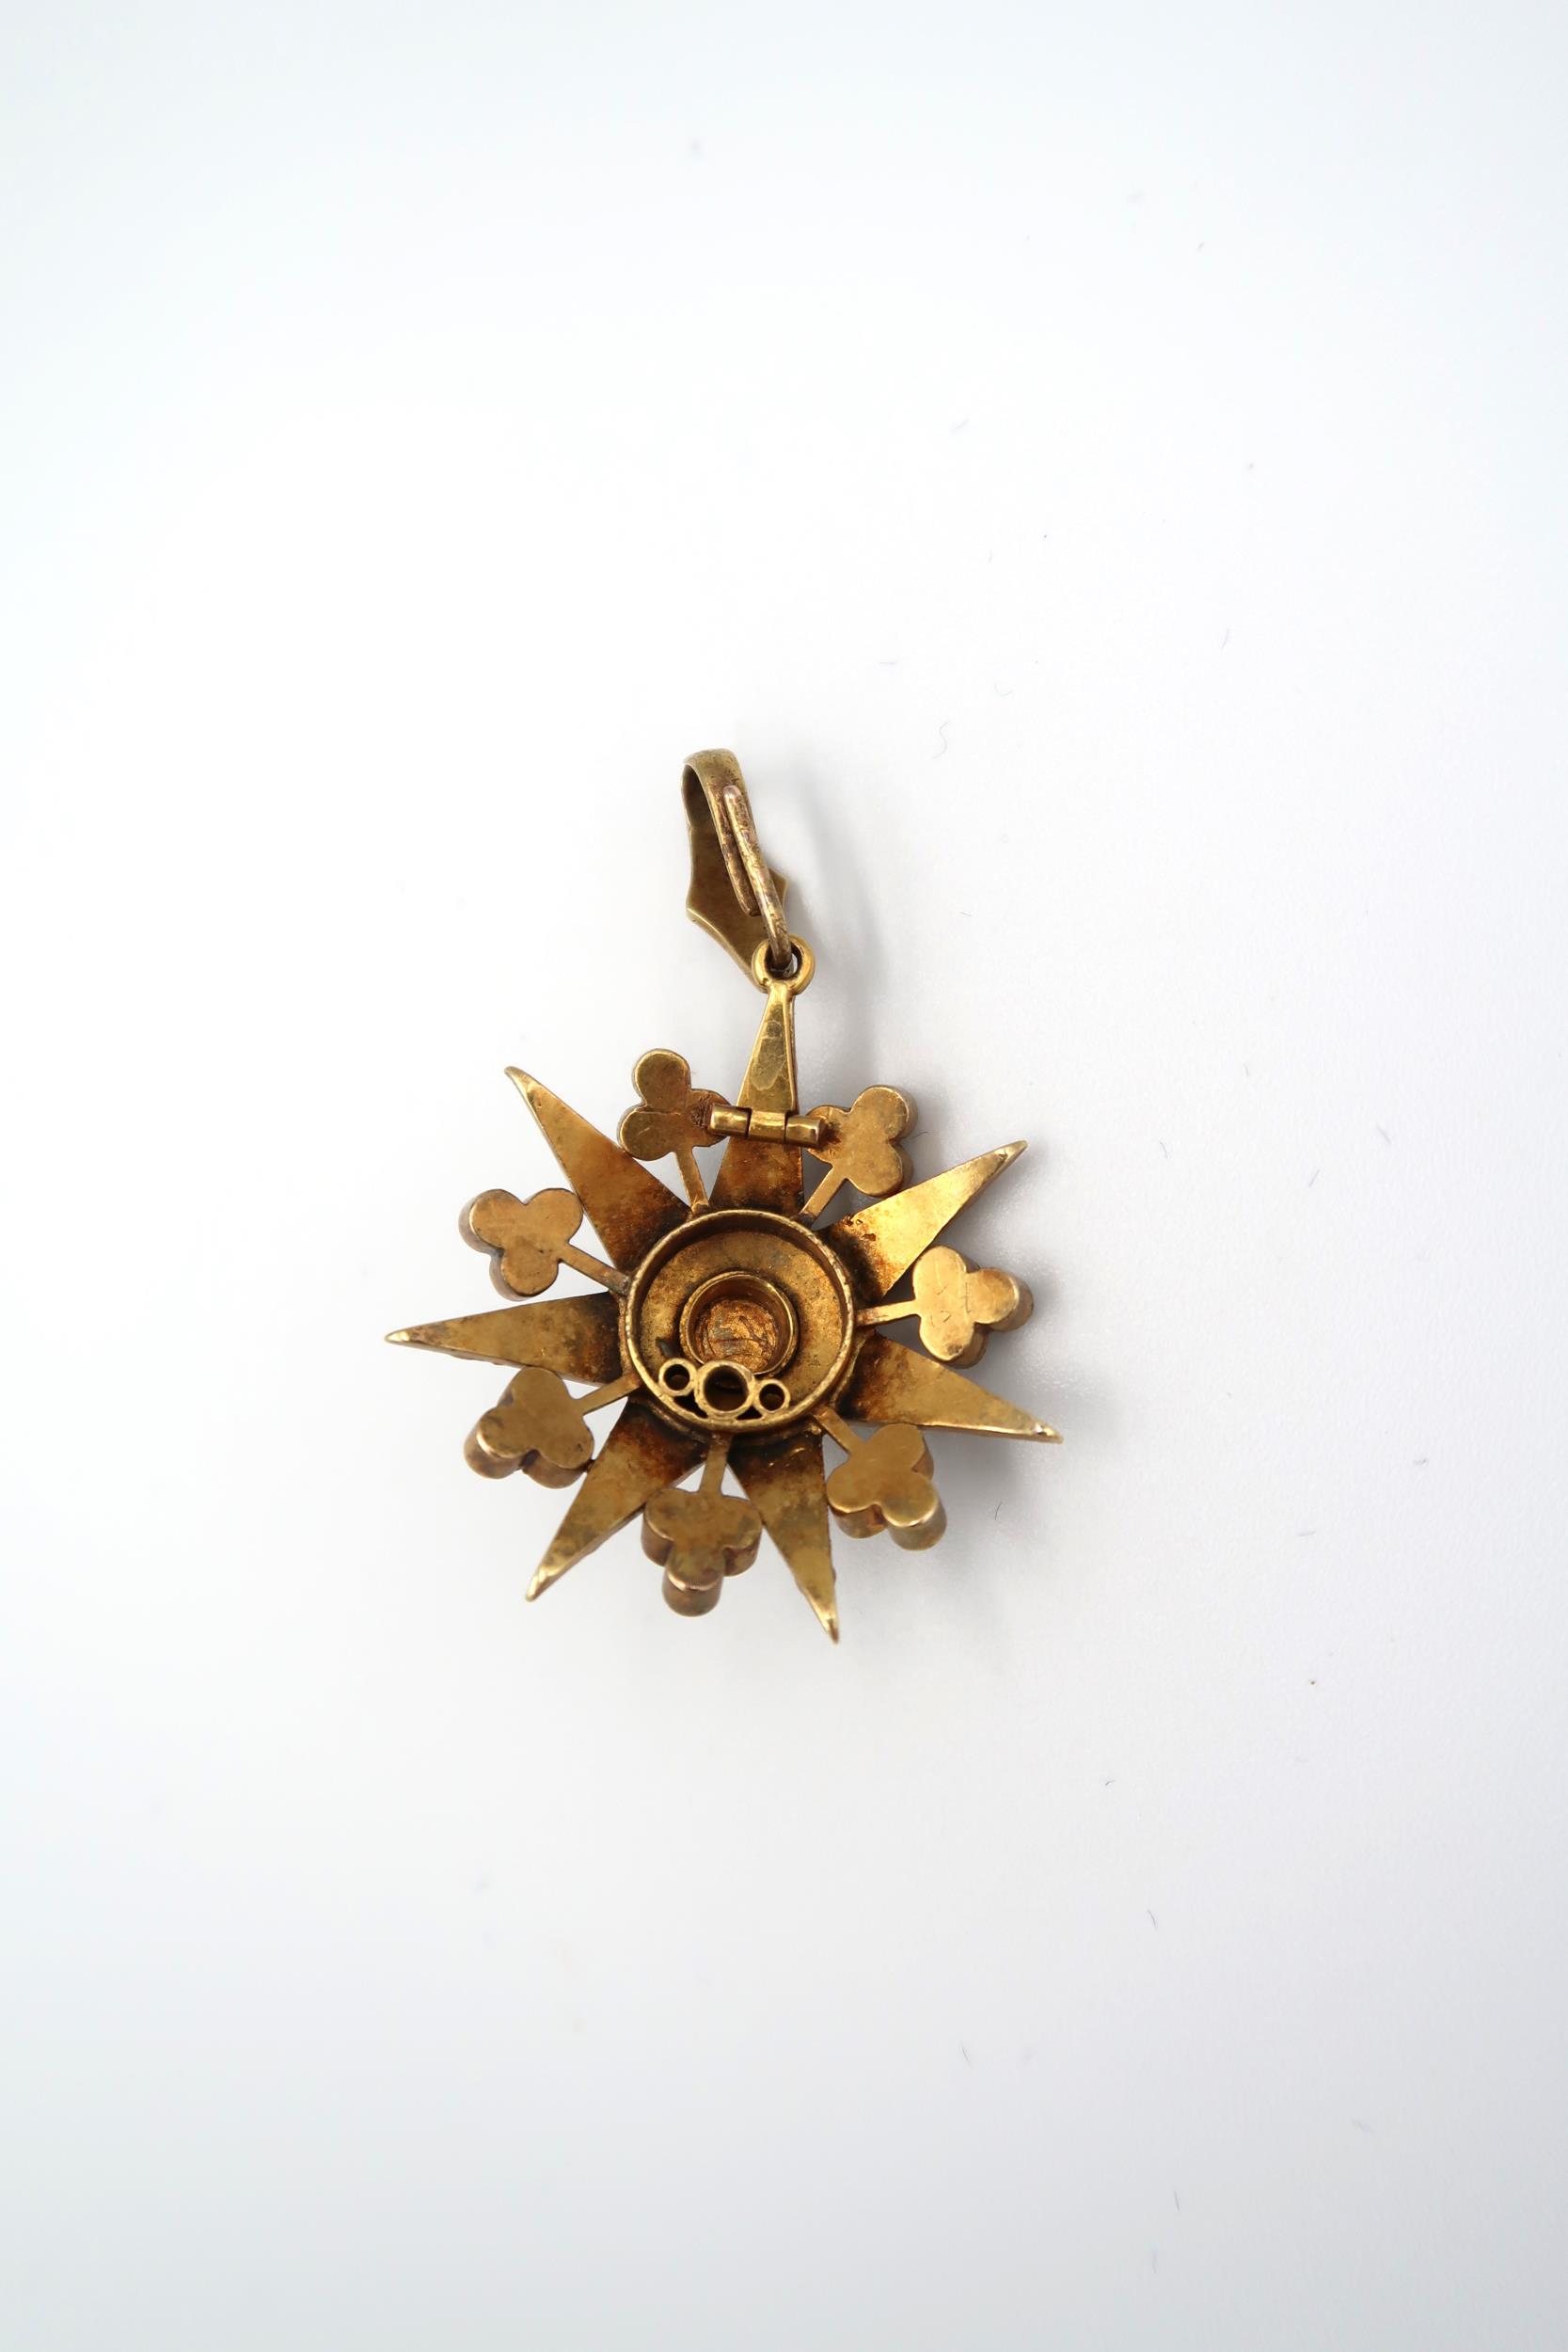 A seed pearl starburst pendant. Length 40mm. Width 30mm. Tests as approximately 15ct gold. Weight - Image 2 of 2